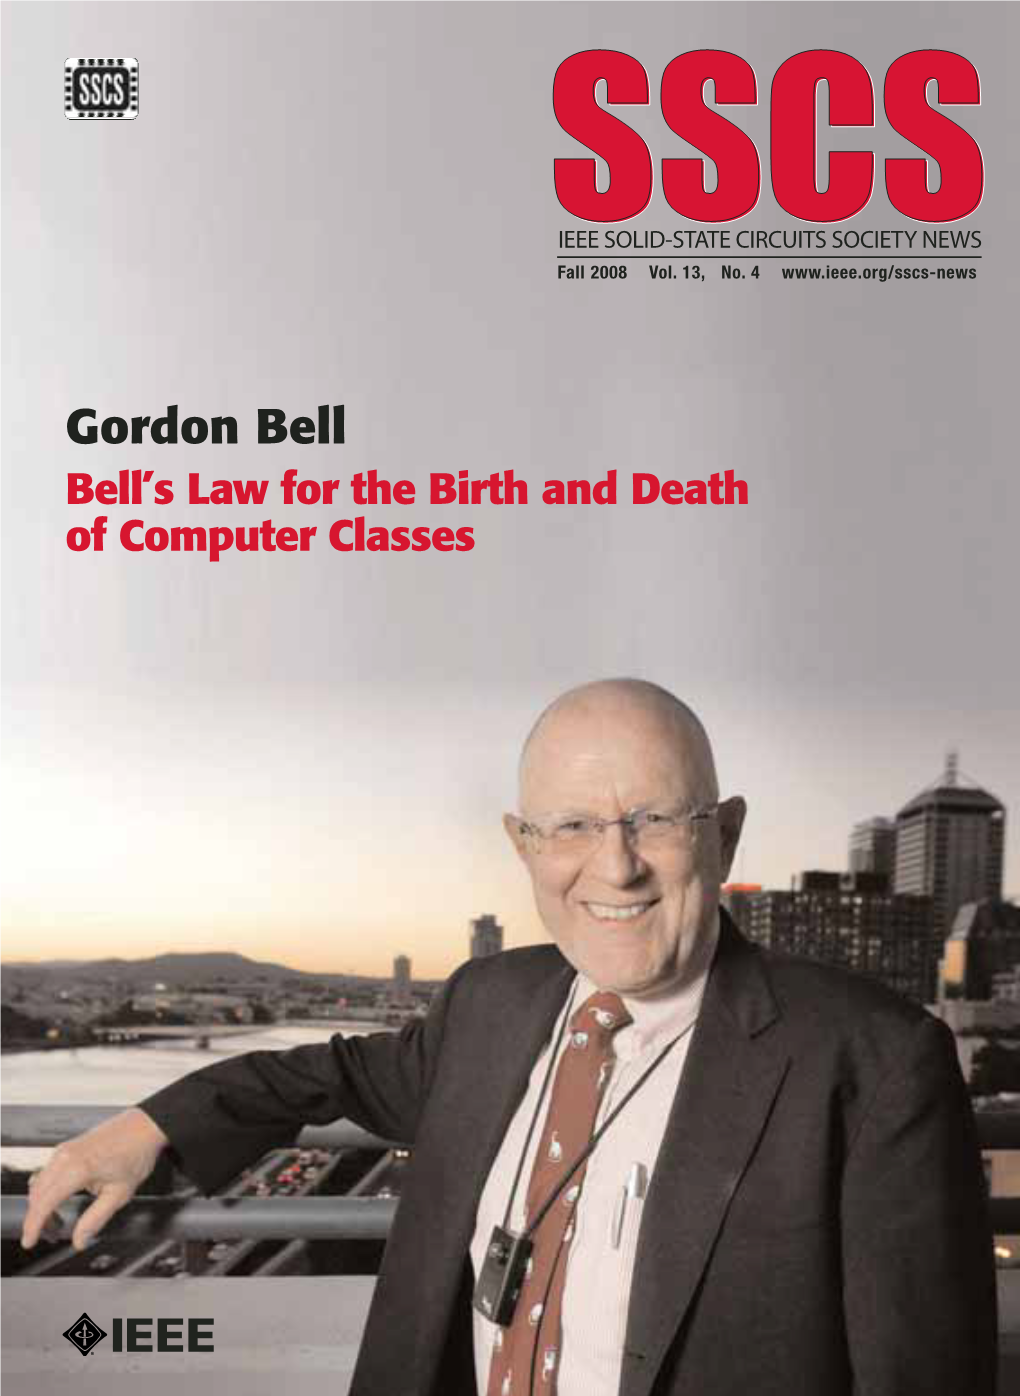 Gordon Bell Bell’S Law for the Birth and Death of Computer Classes Sscs Nlfall08.Qxd 10/8/08 10:04 AM Page 2